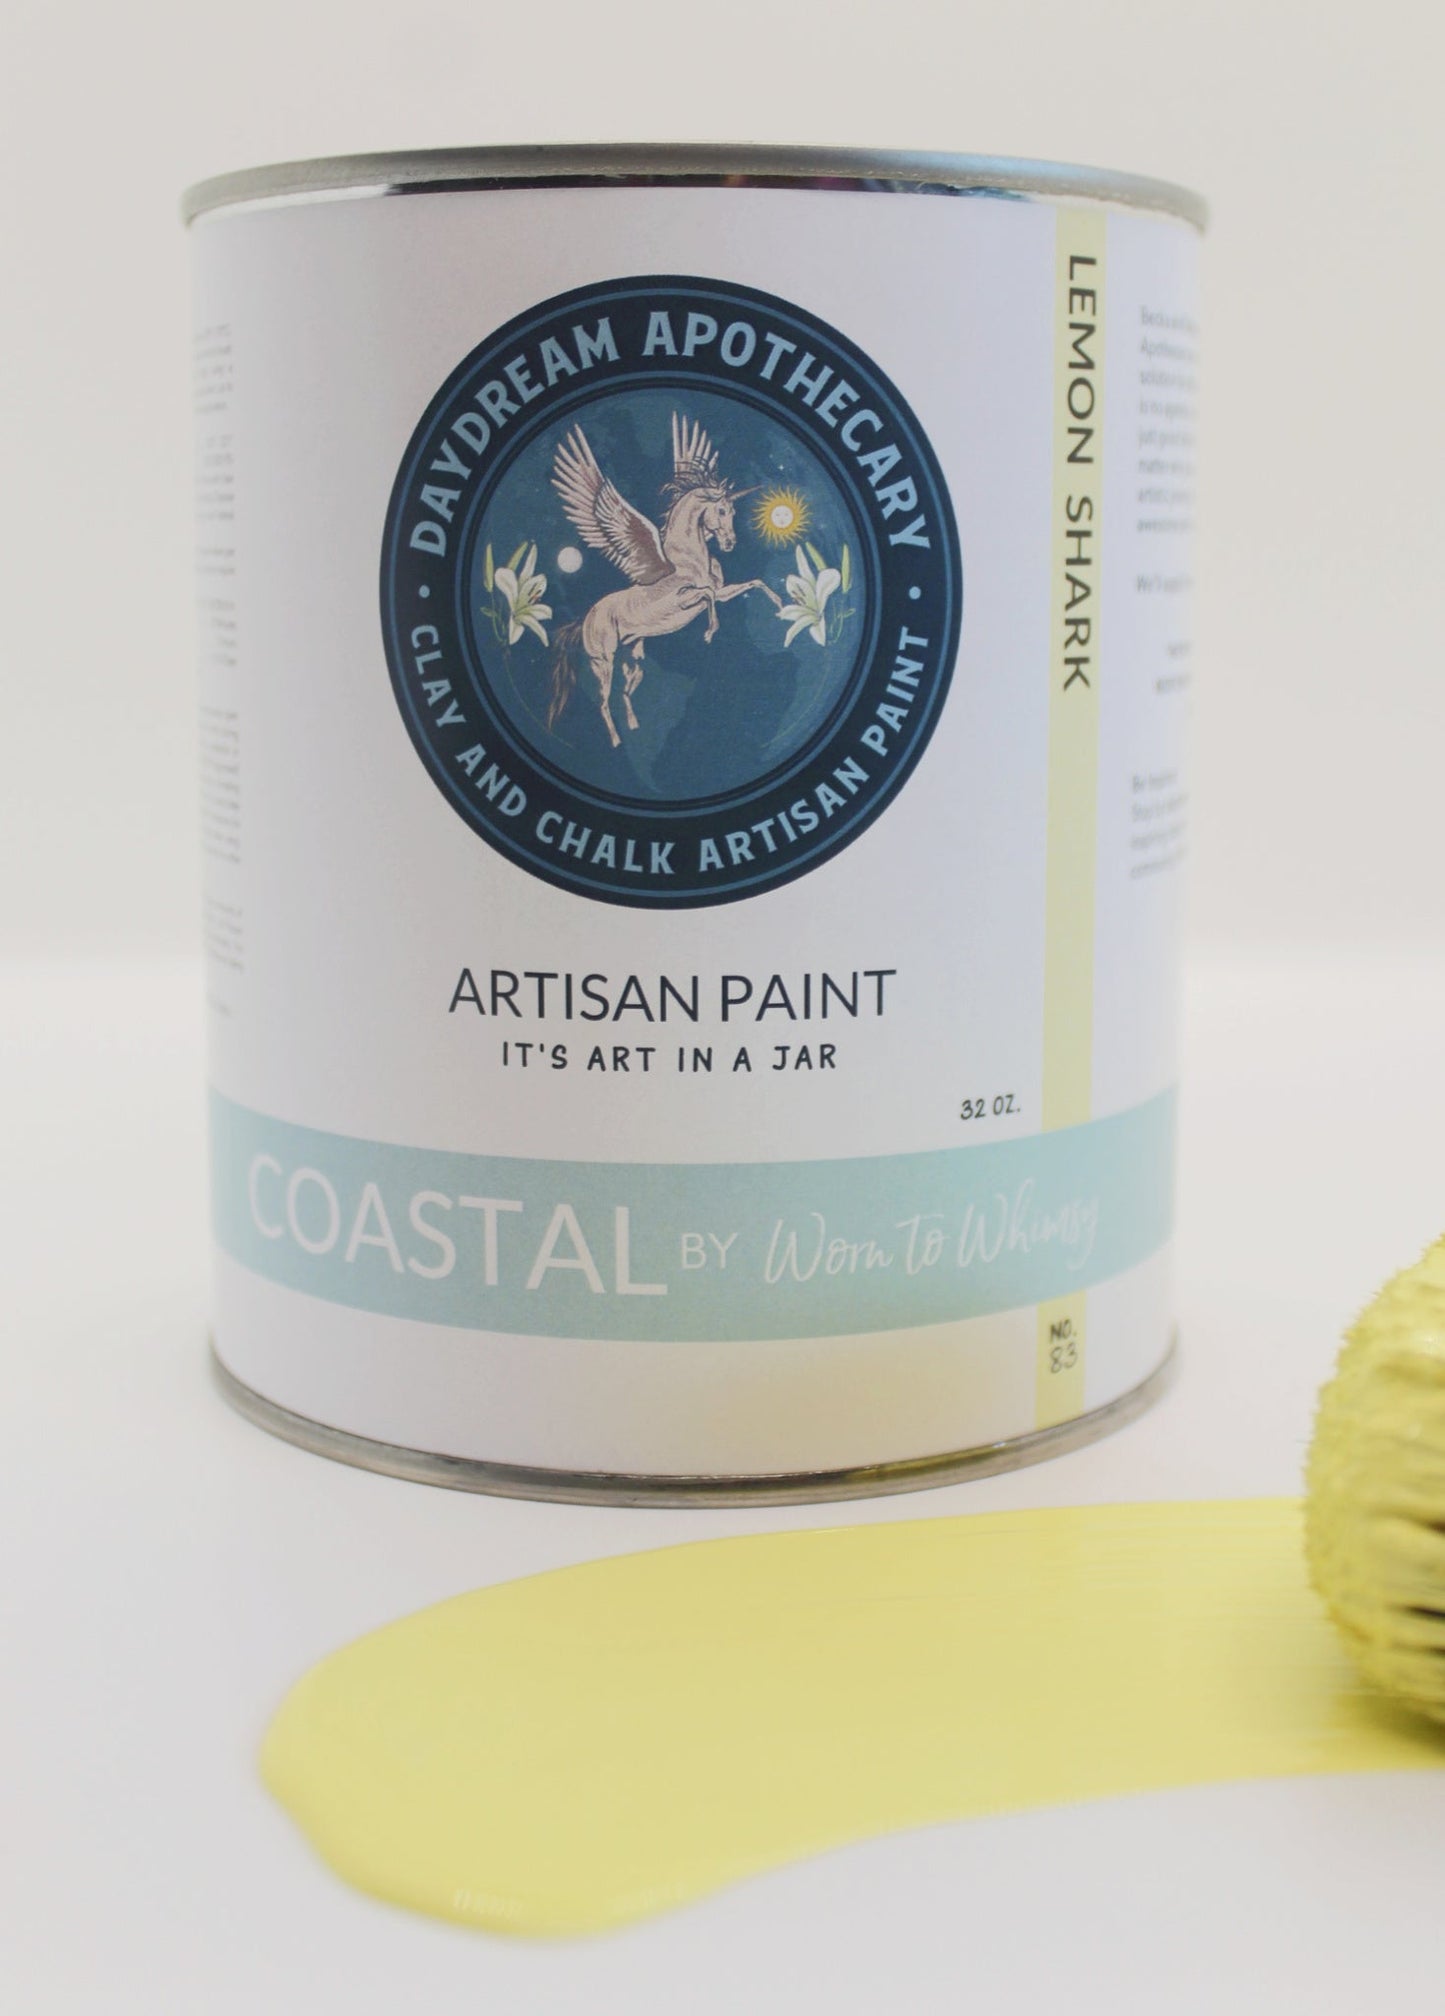 CLOSEOUT SALE! Lemon Shark🌊 COASTAL by Worn to Whimsy | Daydream Apothecary Clay and Chalk Artisan Paint